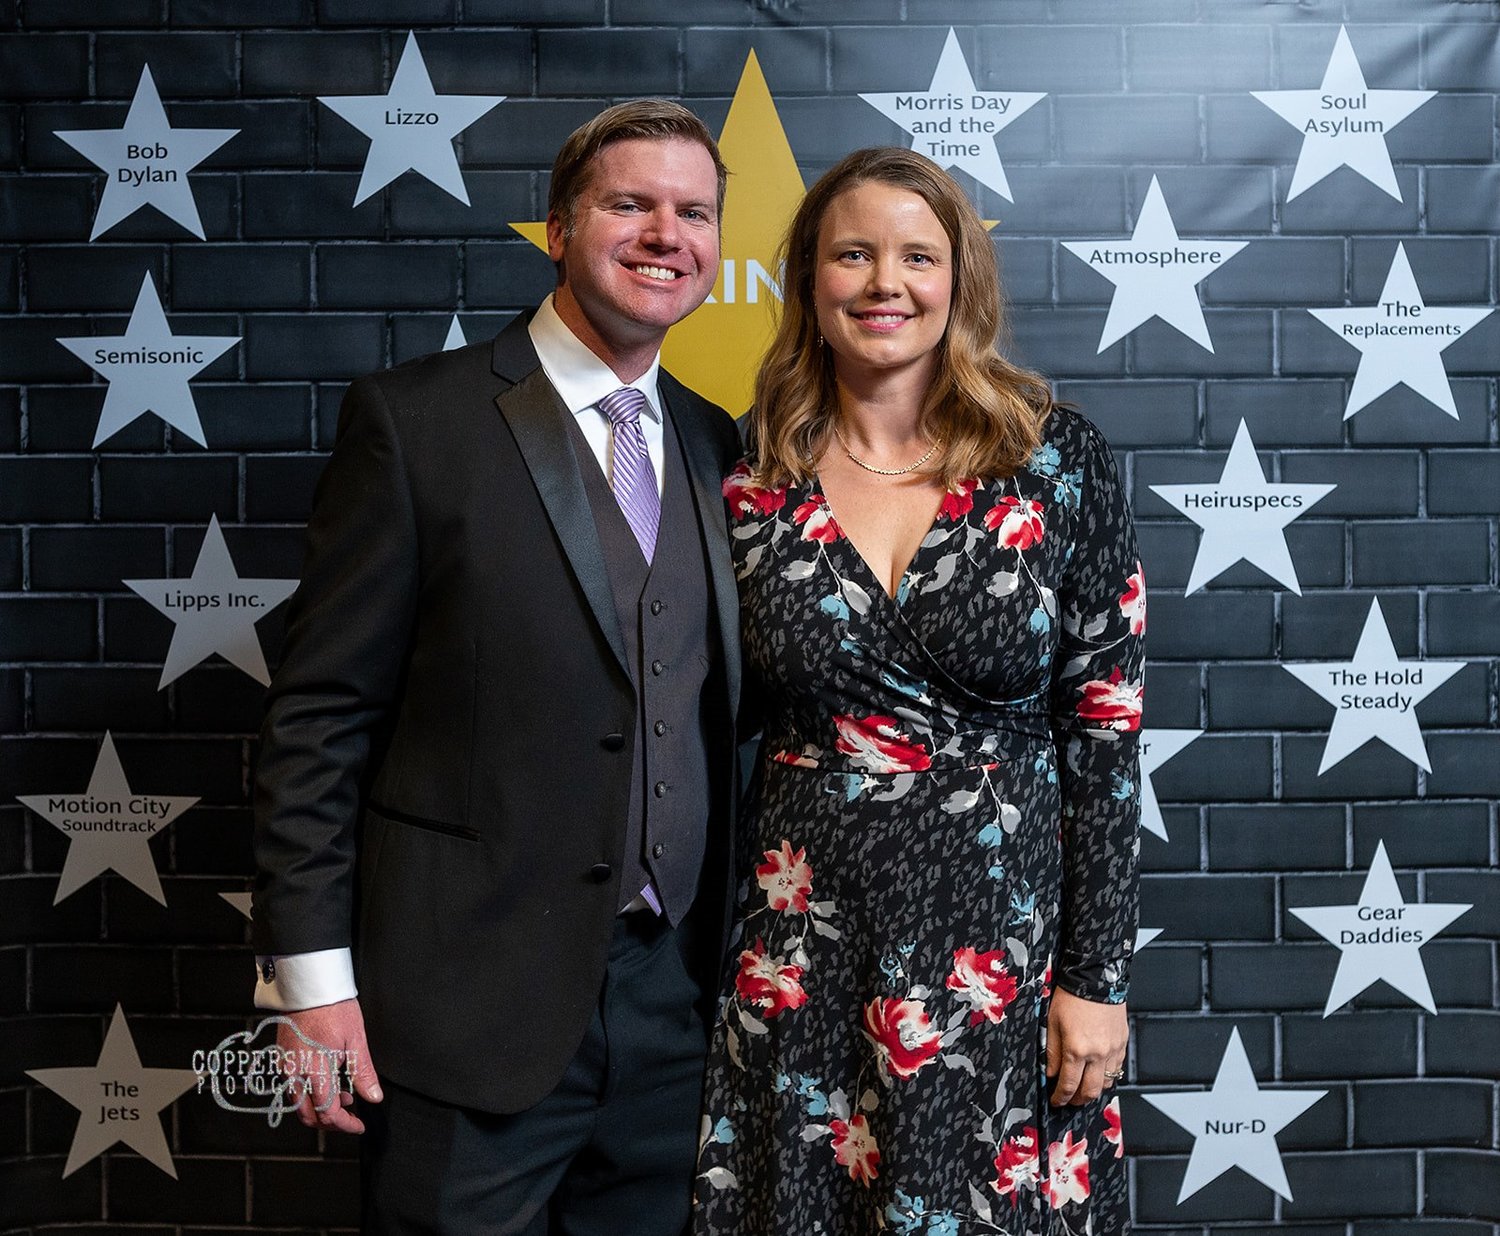 Midway Chamber of Commerce Executive Director Chad Kulas with wife Julie